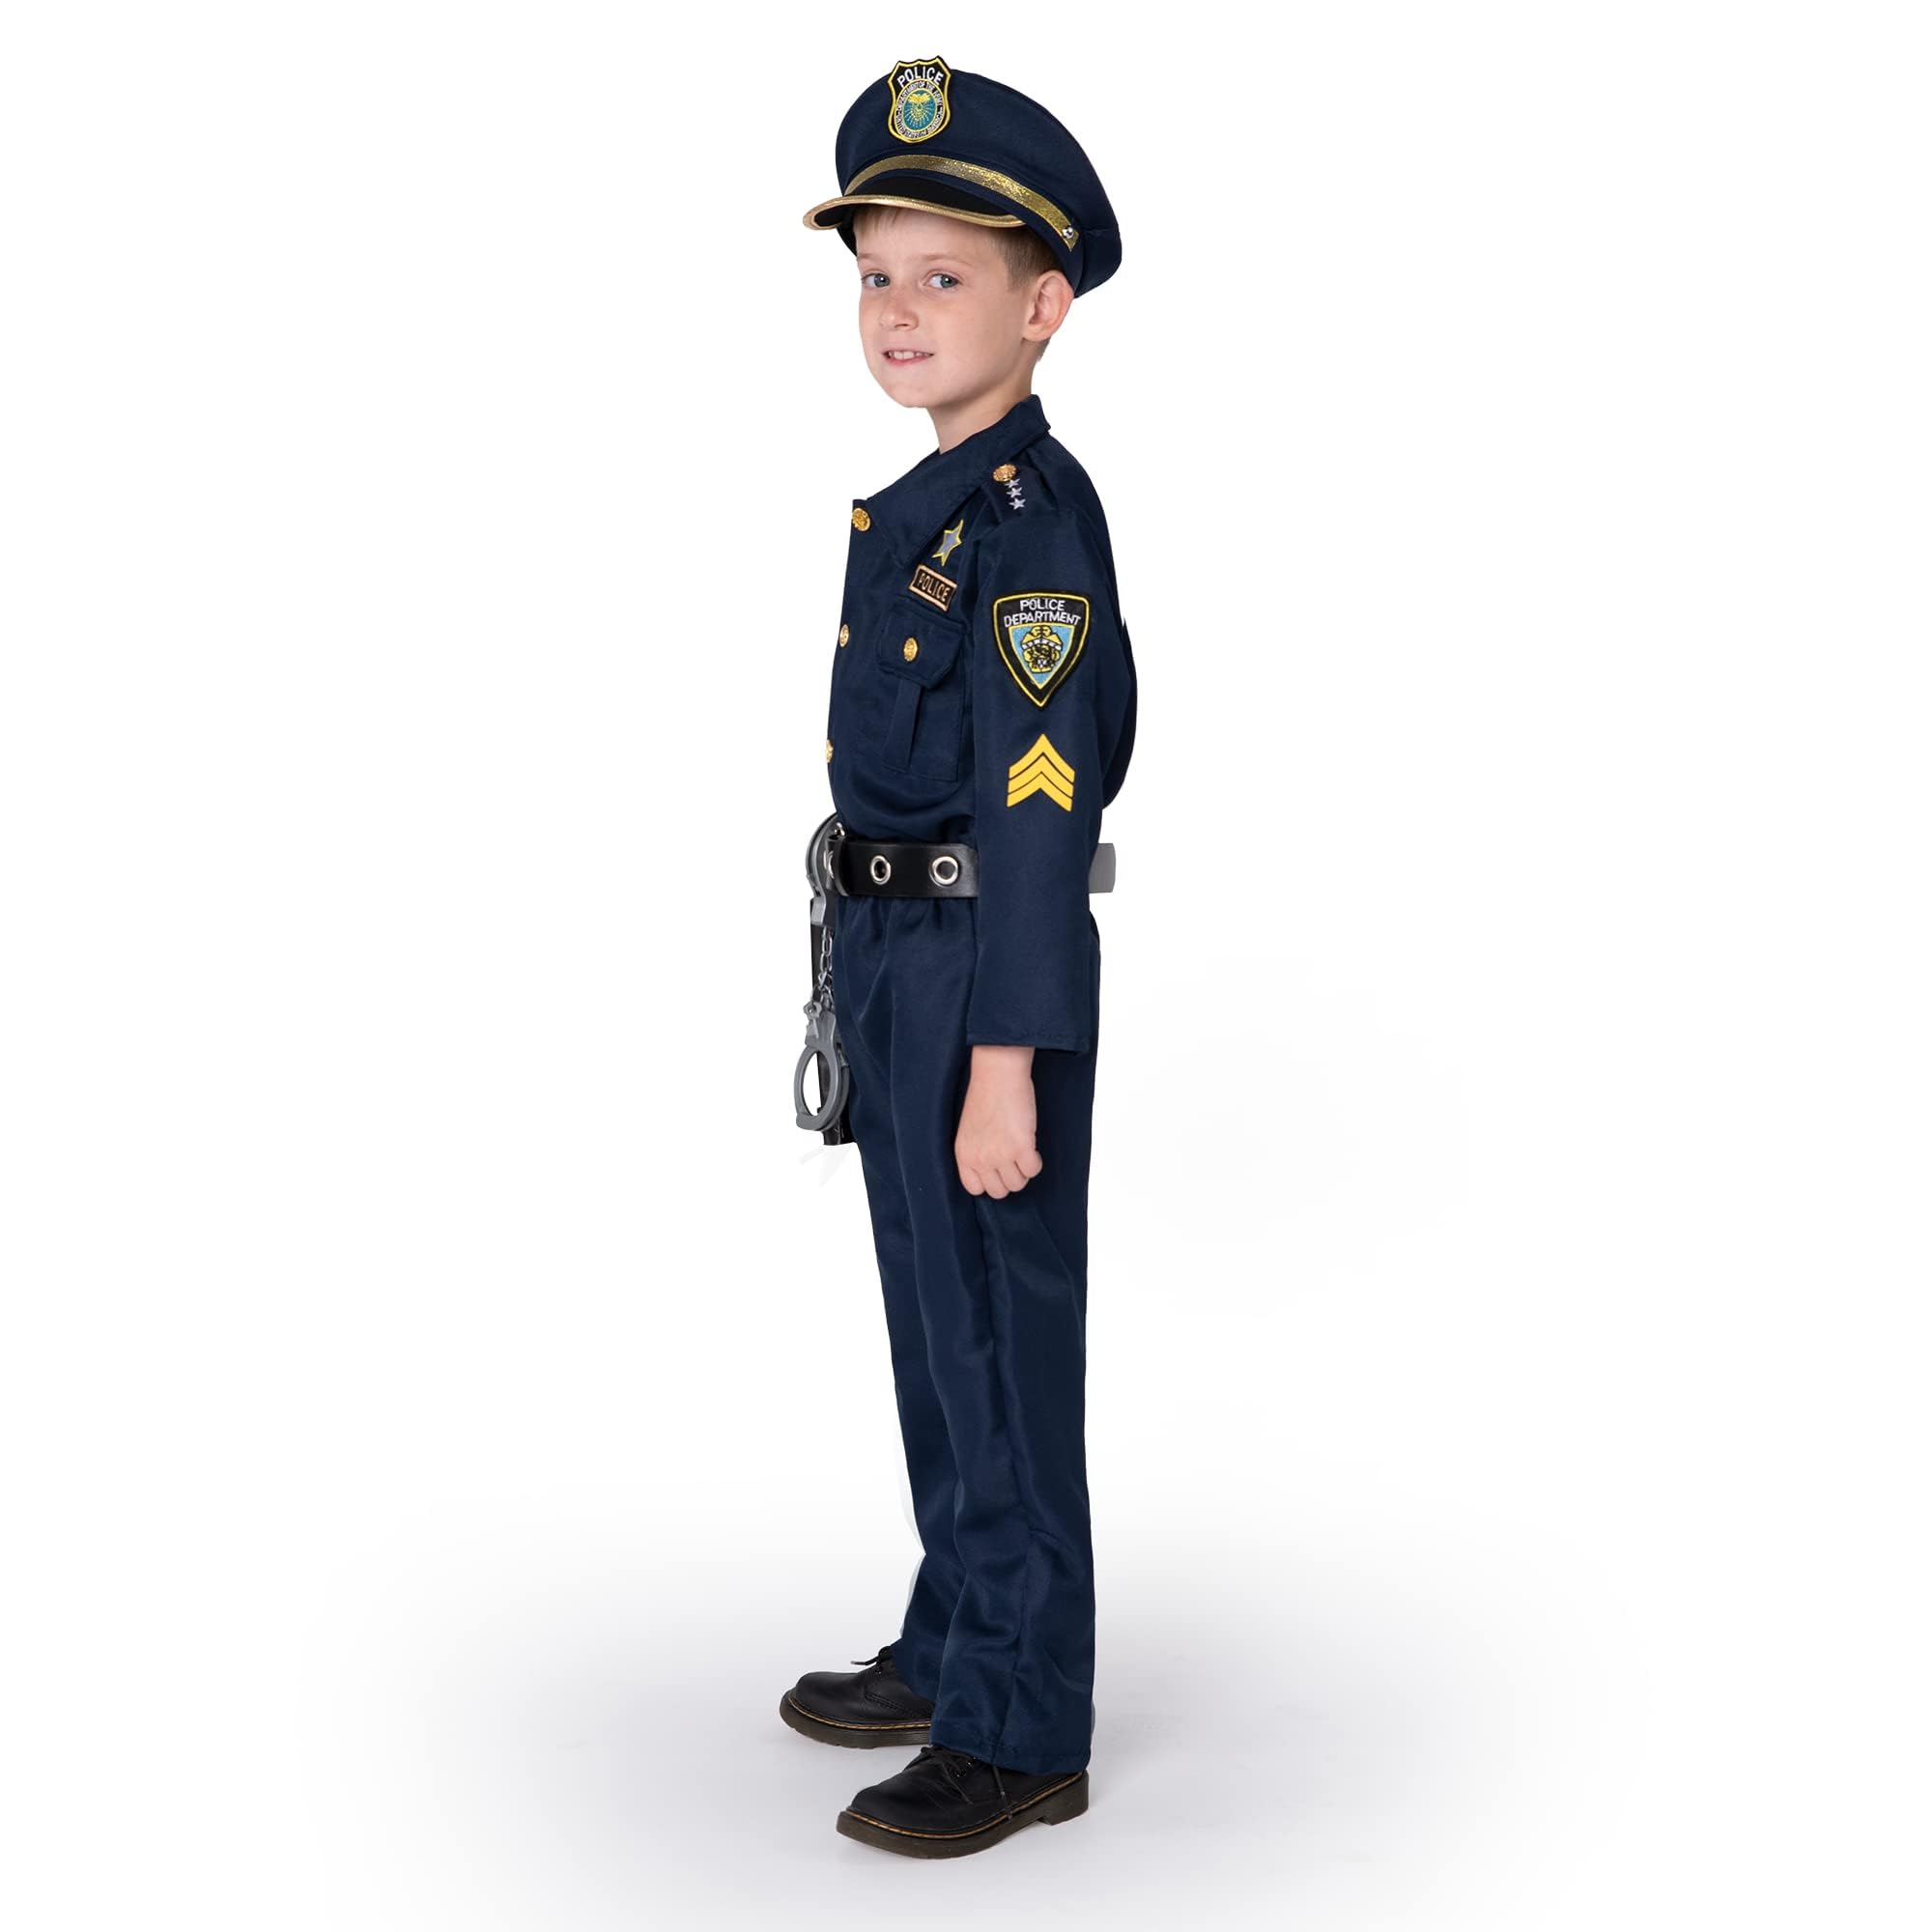 JOYIN Toy Deluxe Police Officer Costume and Role Play Kit for Kids Halloween Cosplay (Toddler)